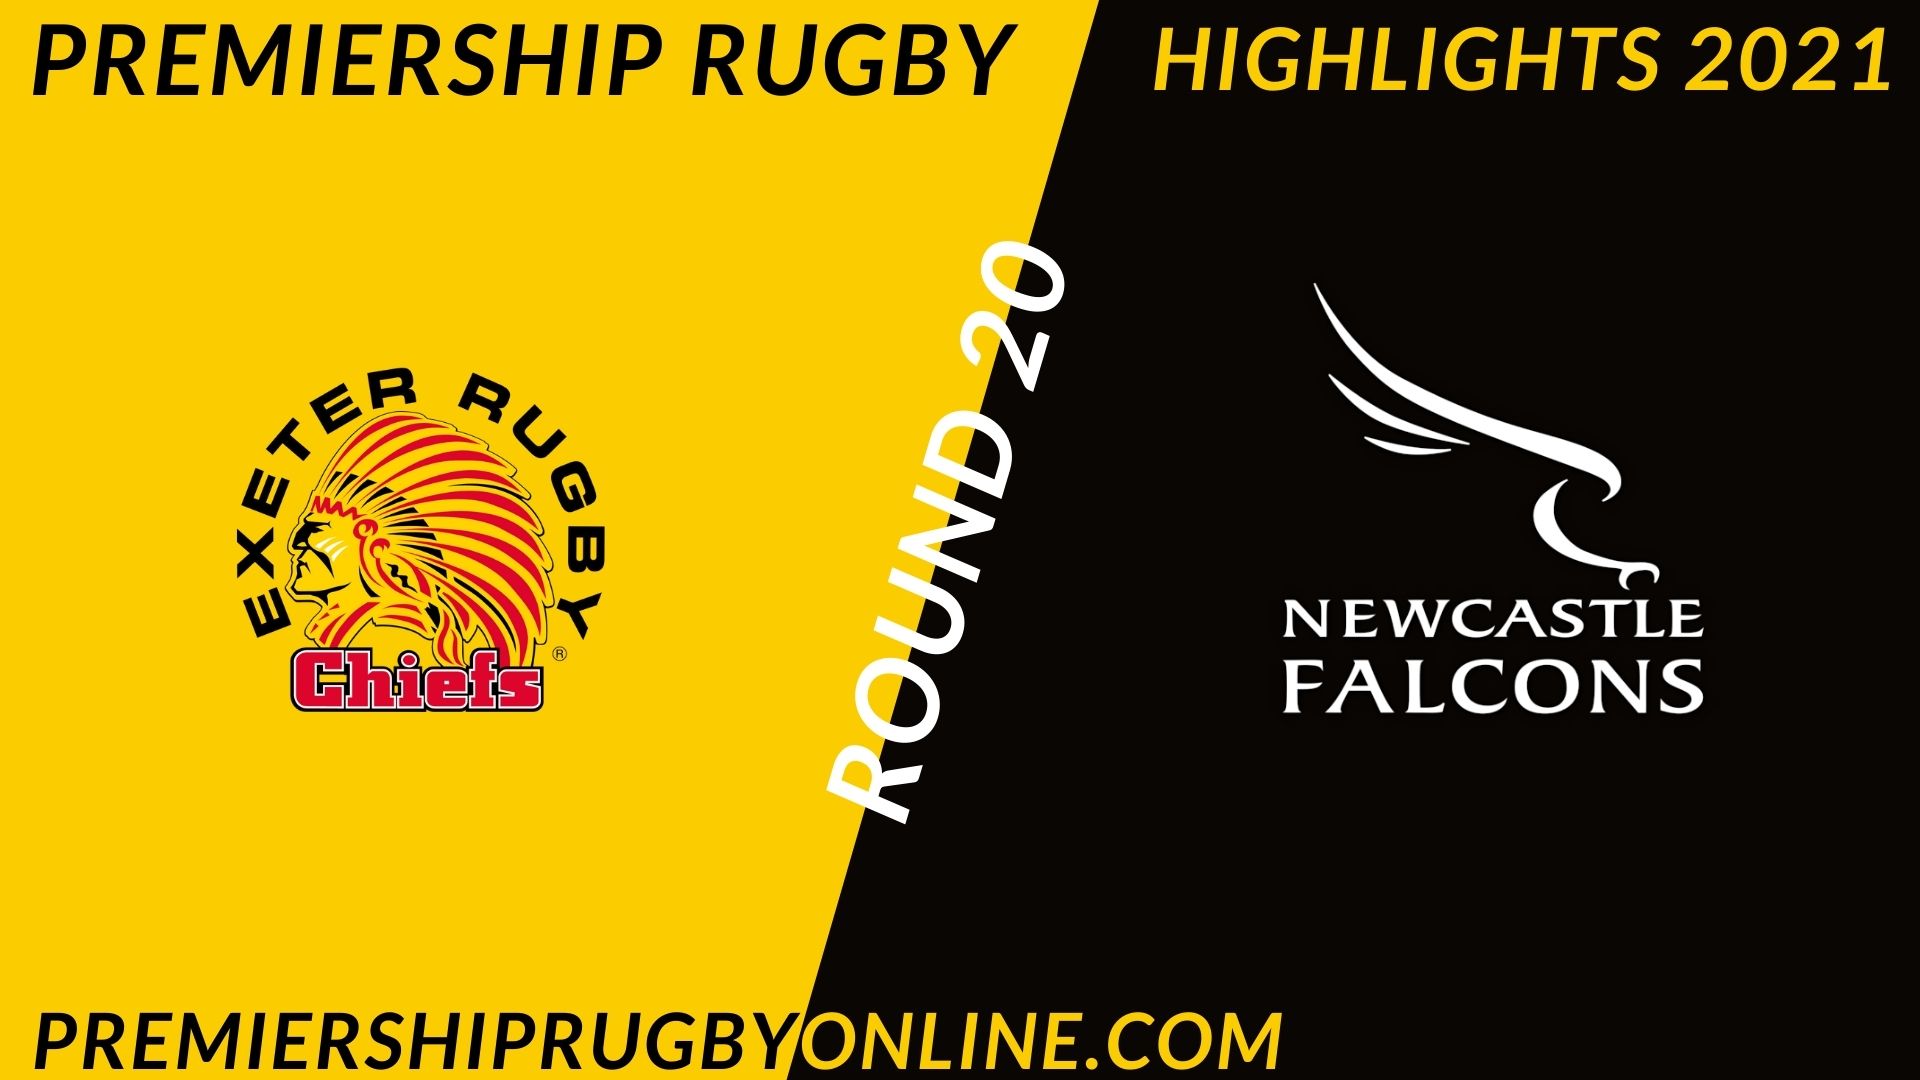 Exeter Chiefs Vs Newcastle Falcons Highlights 2021 RD 20